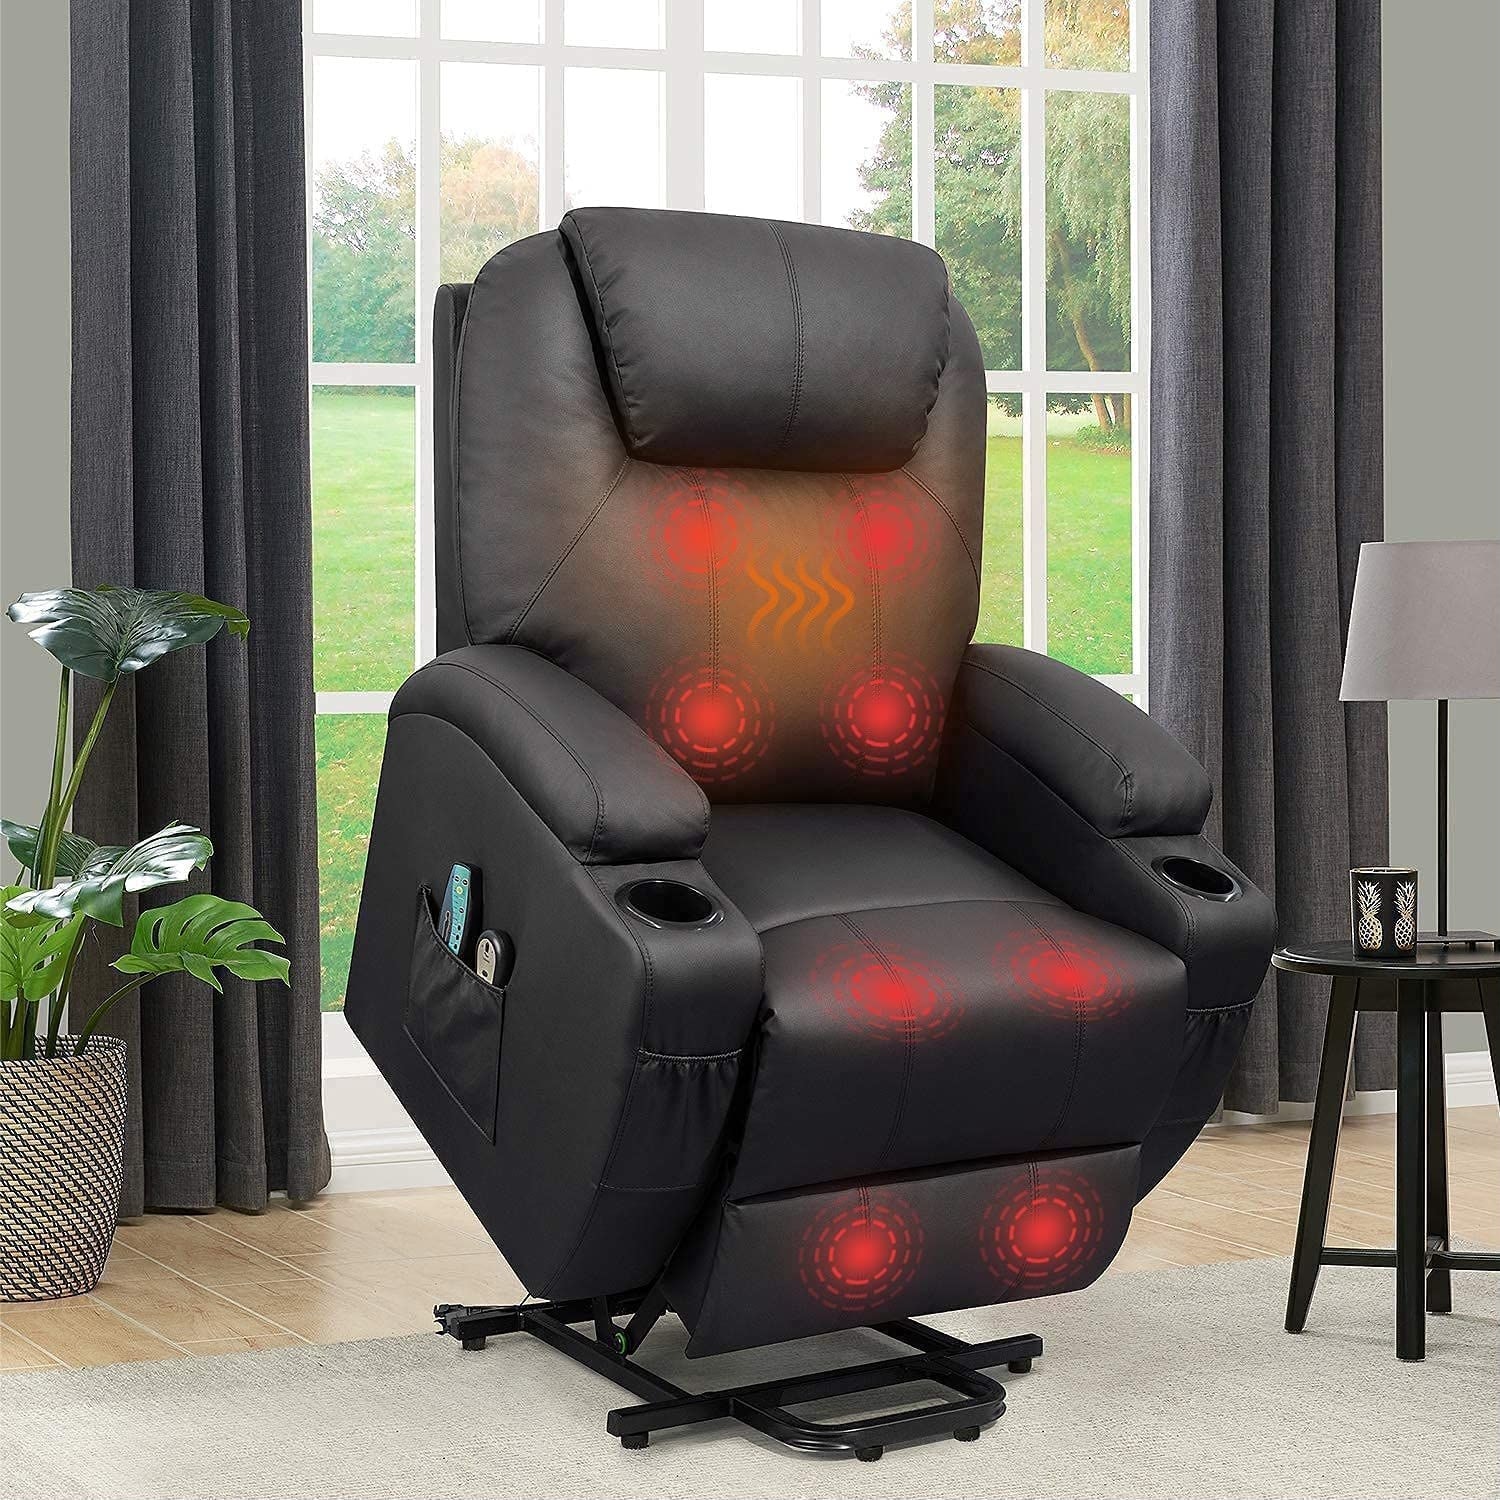 https://ak1.ostkcdn.com/images/products/is/images/direct/41e24d95ba44c80e8e038d5835dc697dccc0c479/Power-Lift-Recliner-Chair-PU-Leather-for-Elderly-with-Massage-and-Heating-Ergonomic-Lounge.jpg